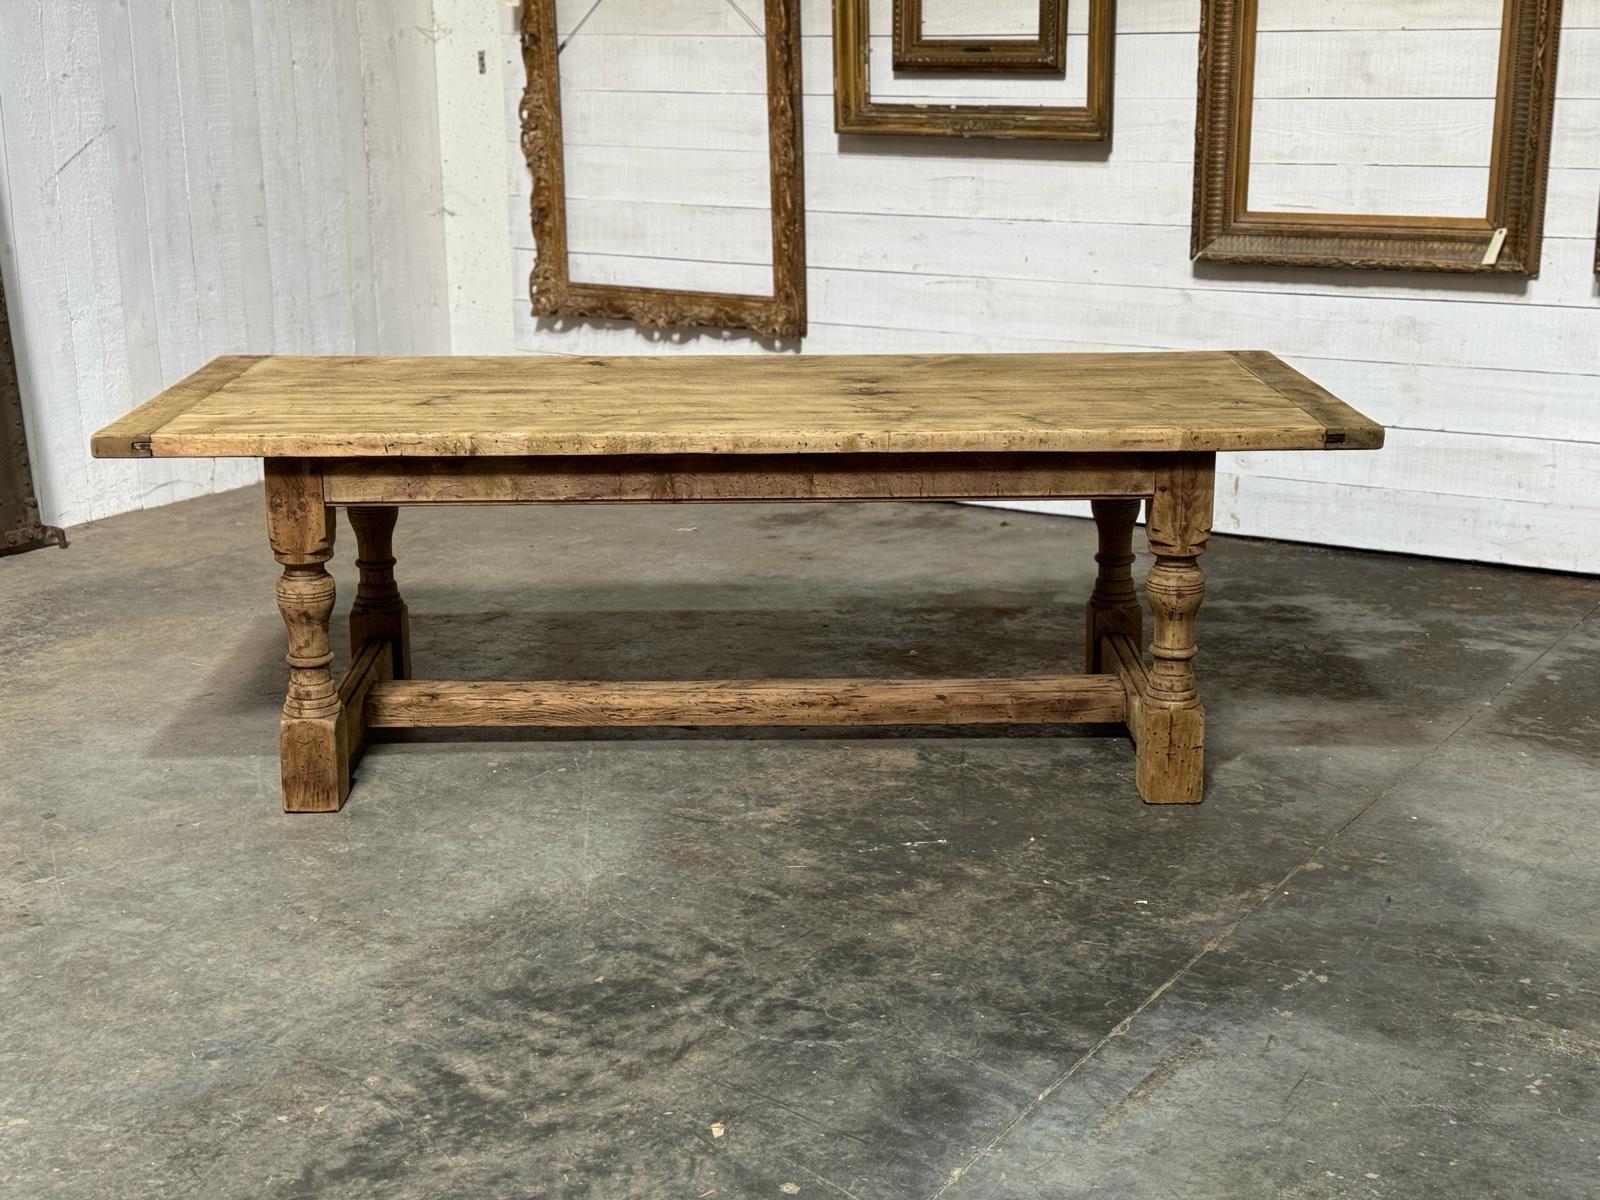 Its very hard to find a Farmhouse Table at 100cm Deep and 240cm long but this is exactly that. Made from Solid Oak and dating to the early 1900s, of excellent quality construction with pegged joints this table will be around for generations to